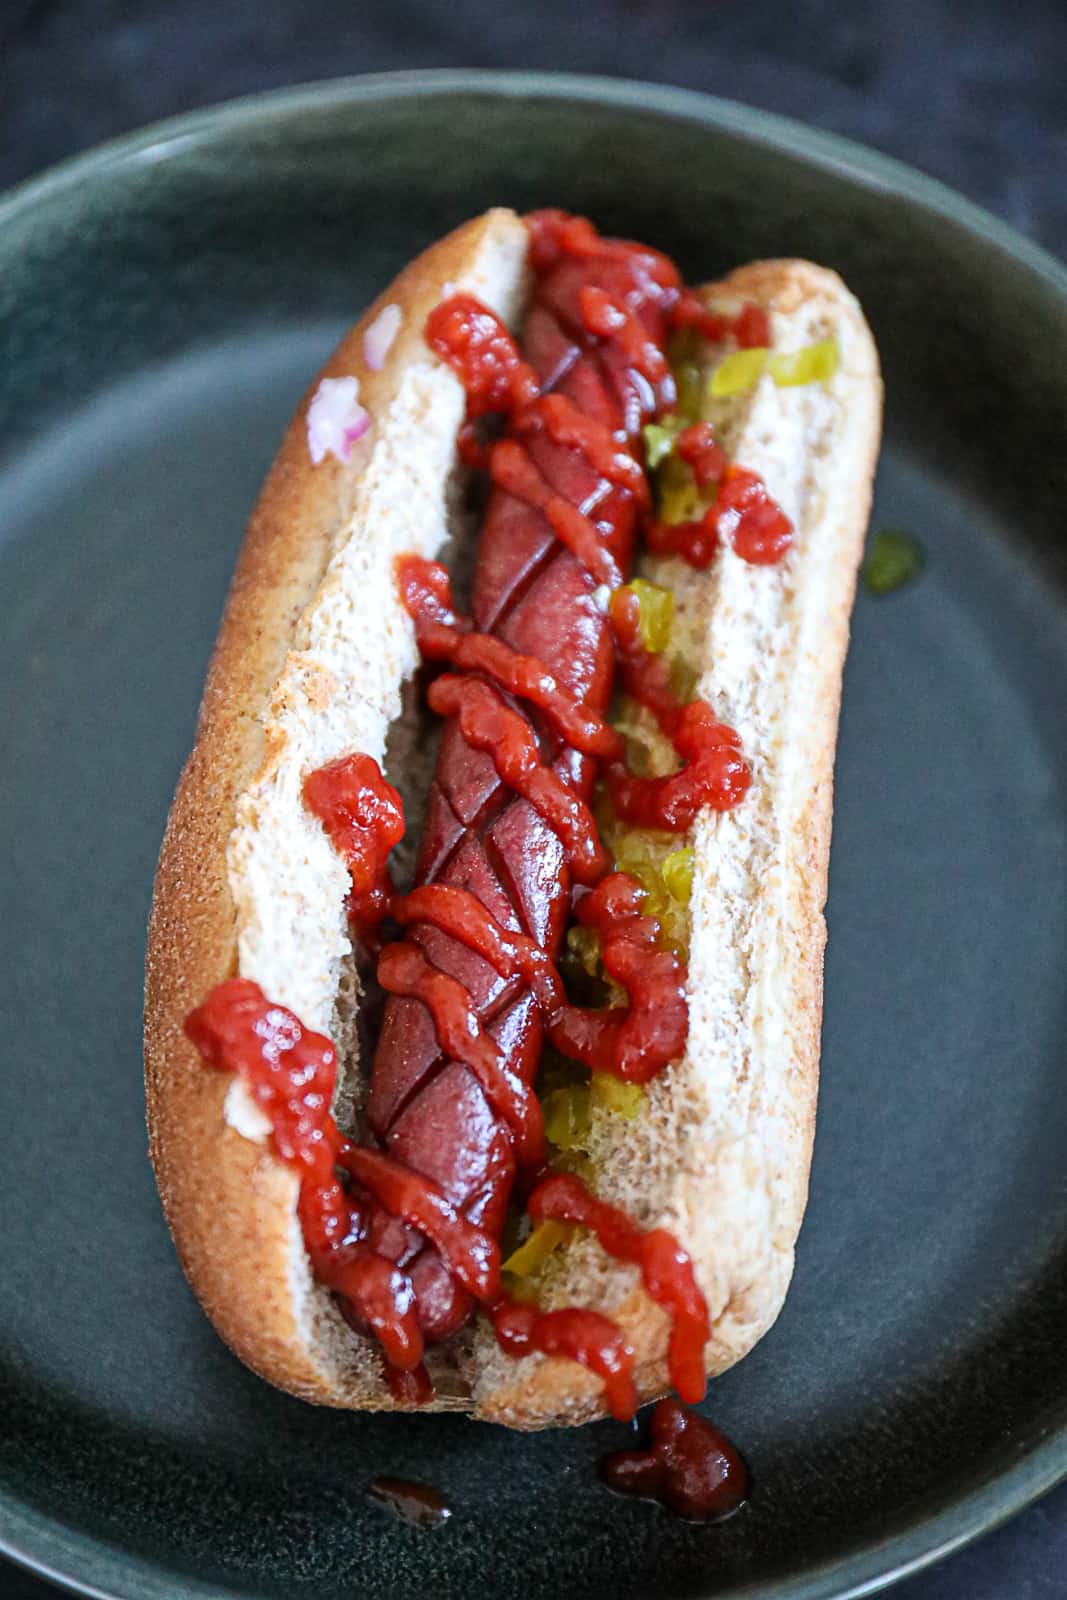 Traeger Hot Dog Smoked with Score Lines and served with ketchup and relish 